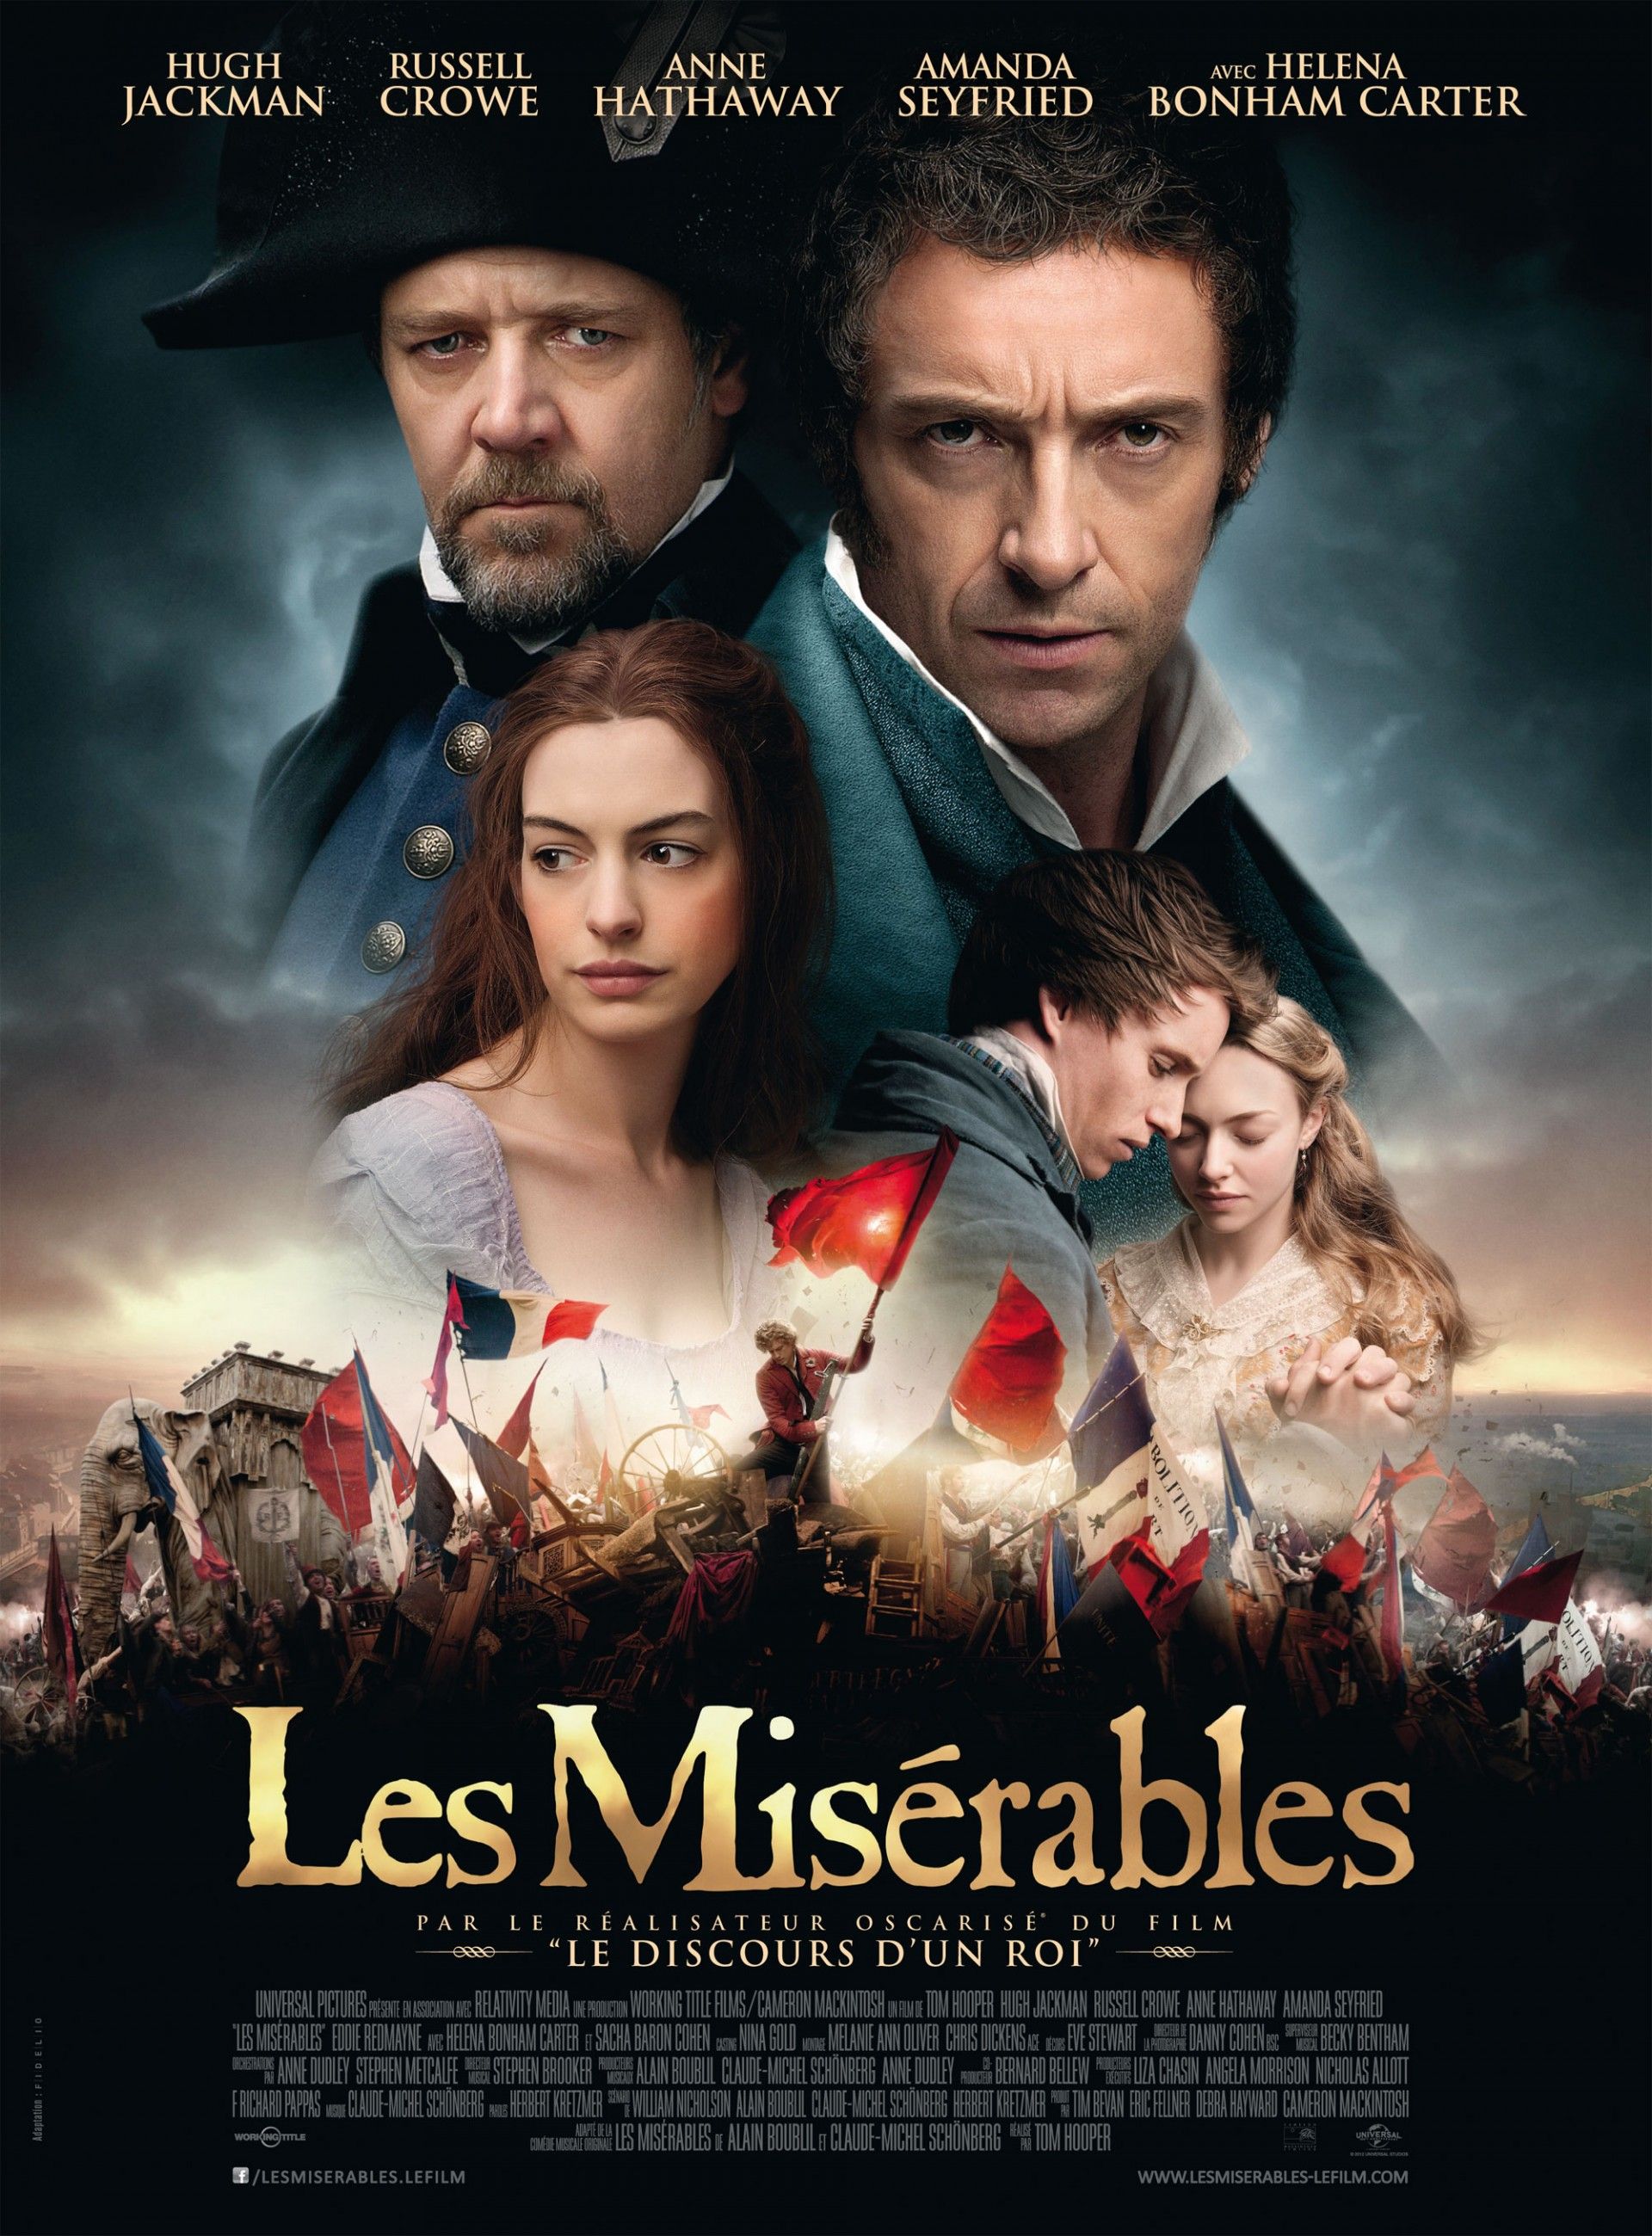 Download miserables image for free